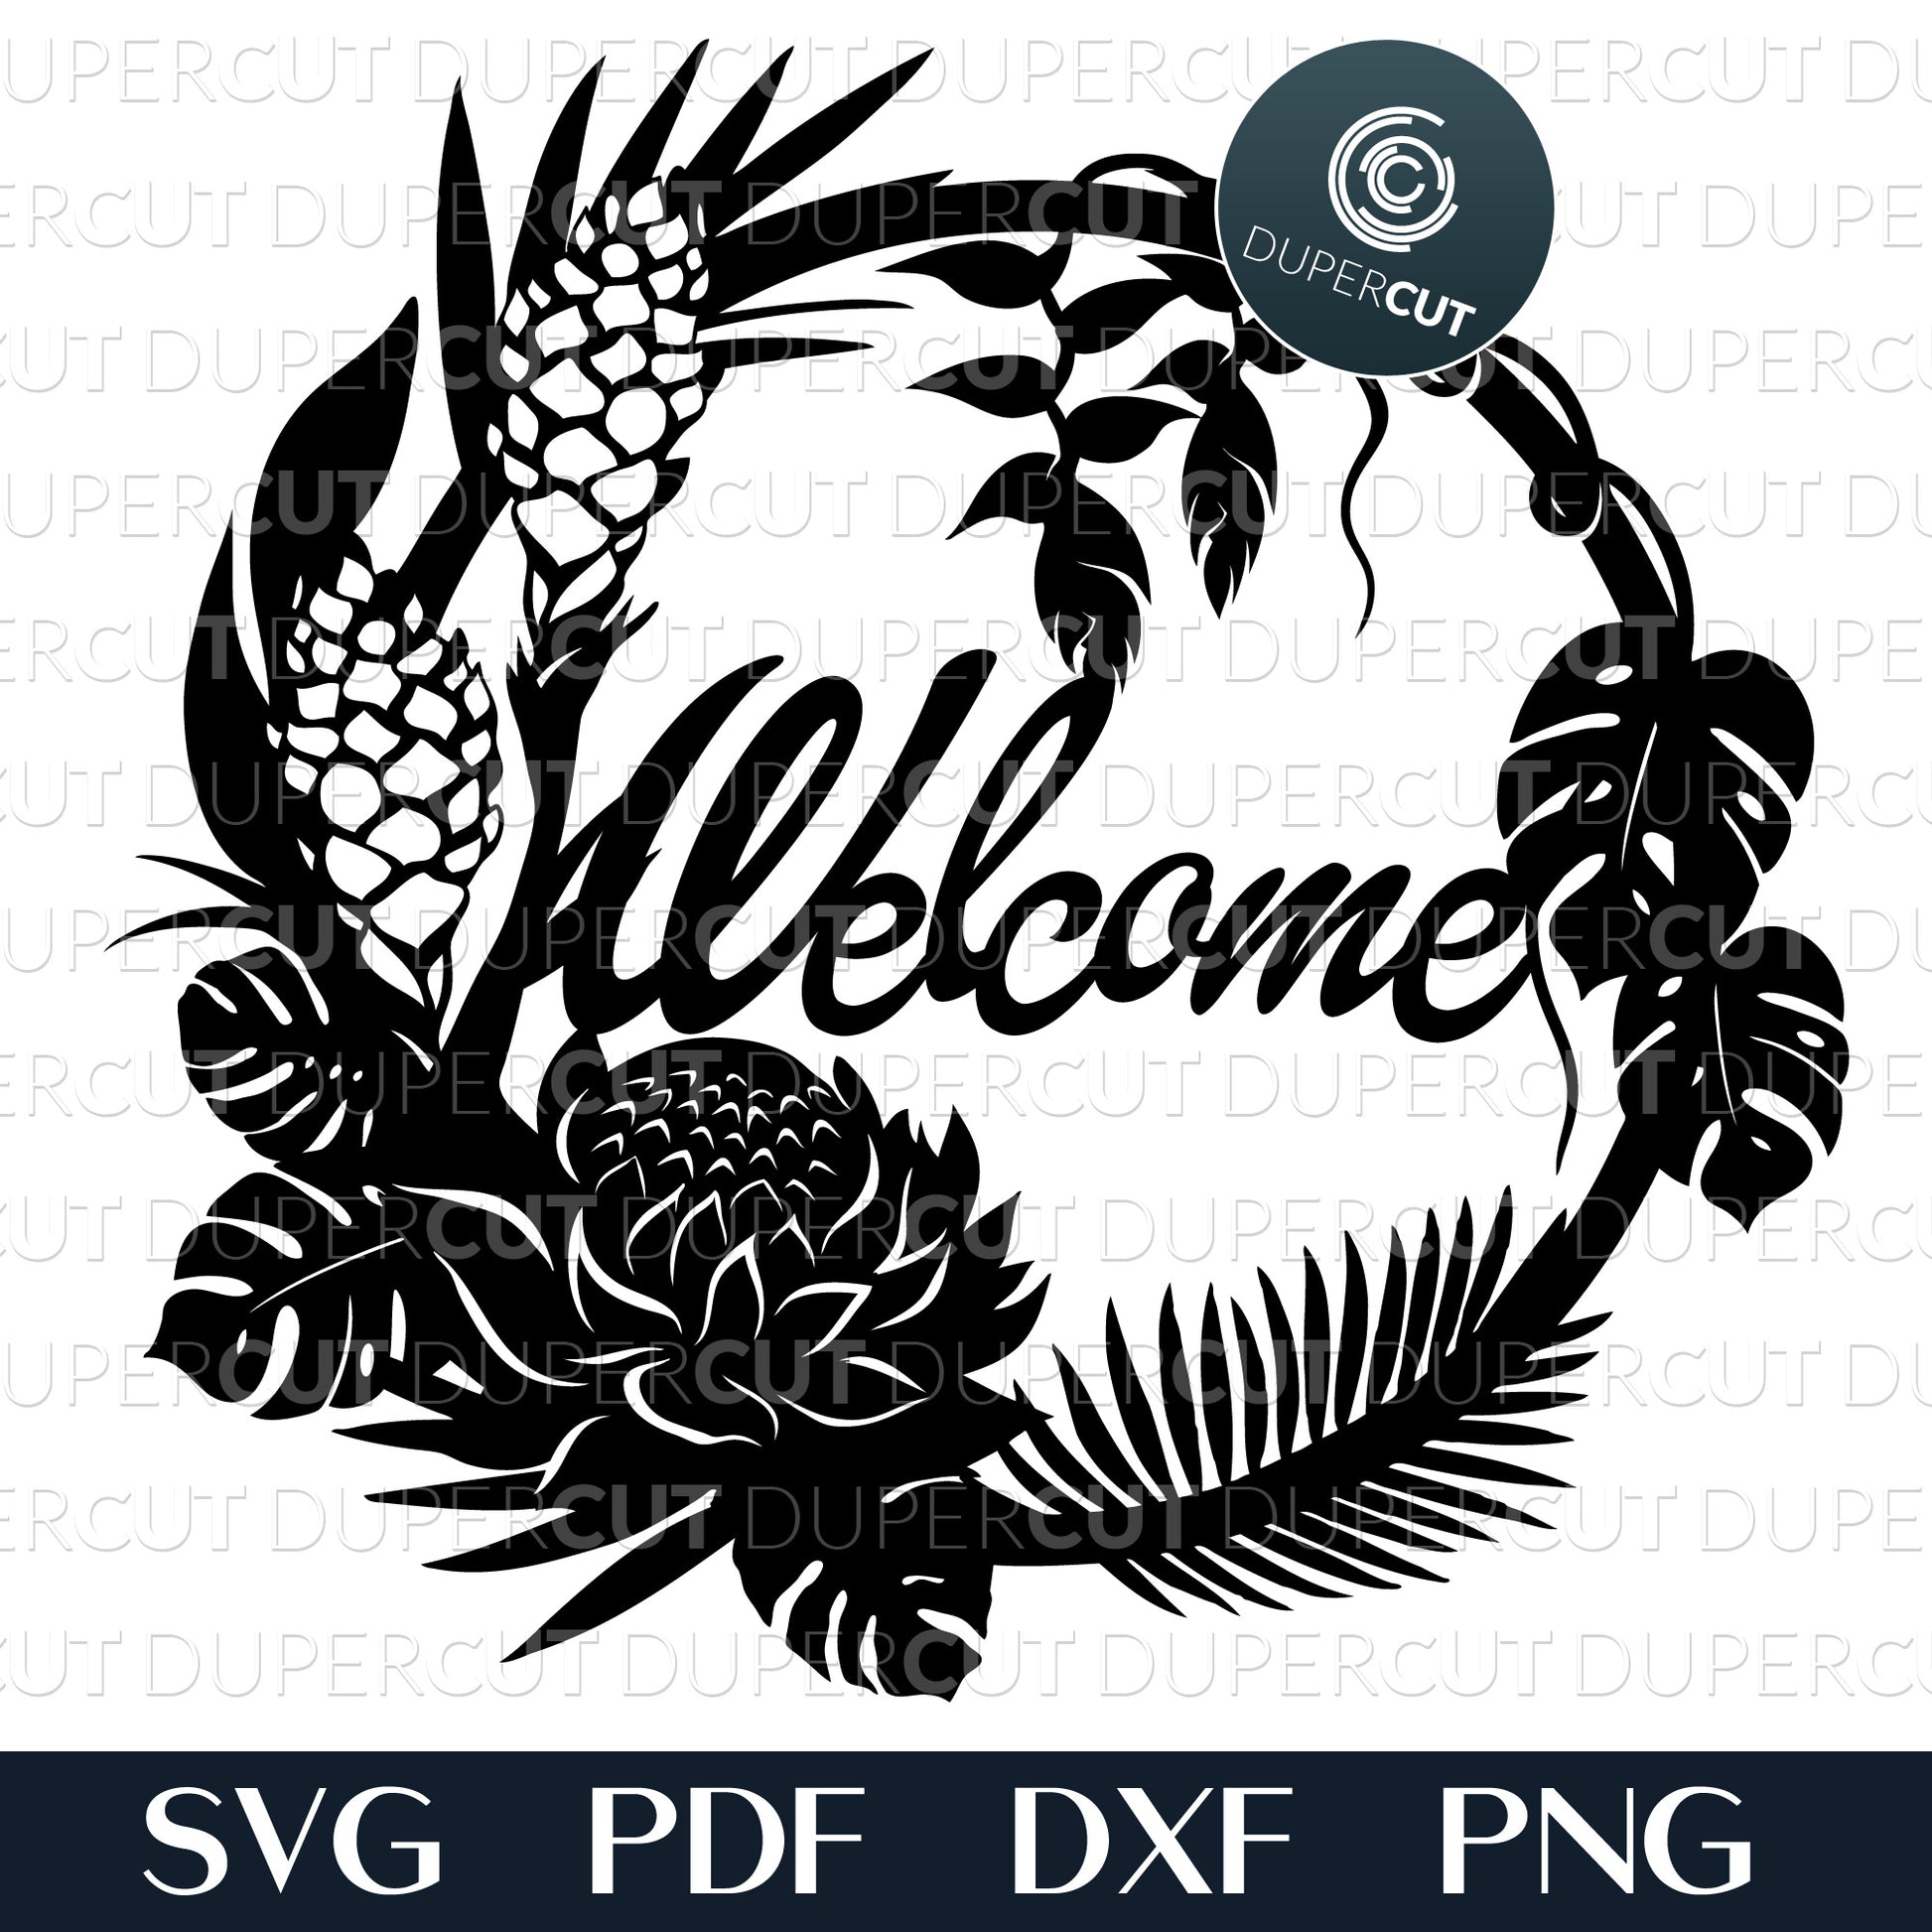 Welcome sign bundle 5 designs - layered laser cutting files SVG PDF DXF templates for commercial use. Glowforge, Cricut, Silhouette Cameo, CNC plasma machines